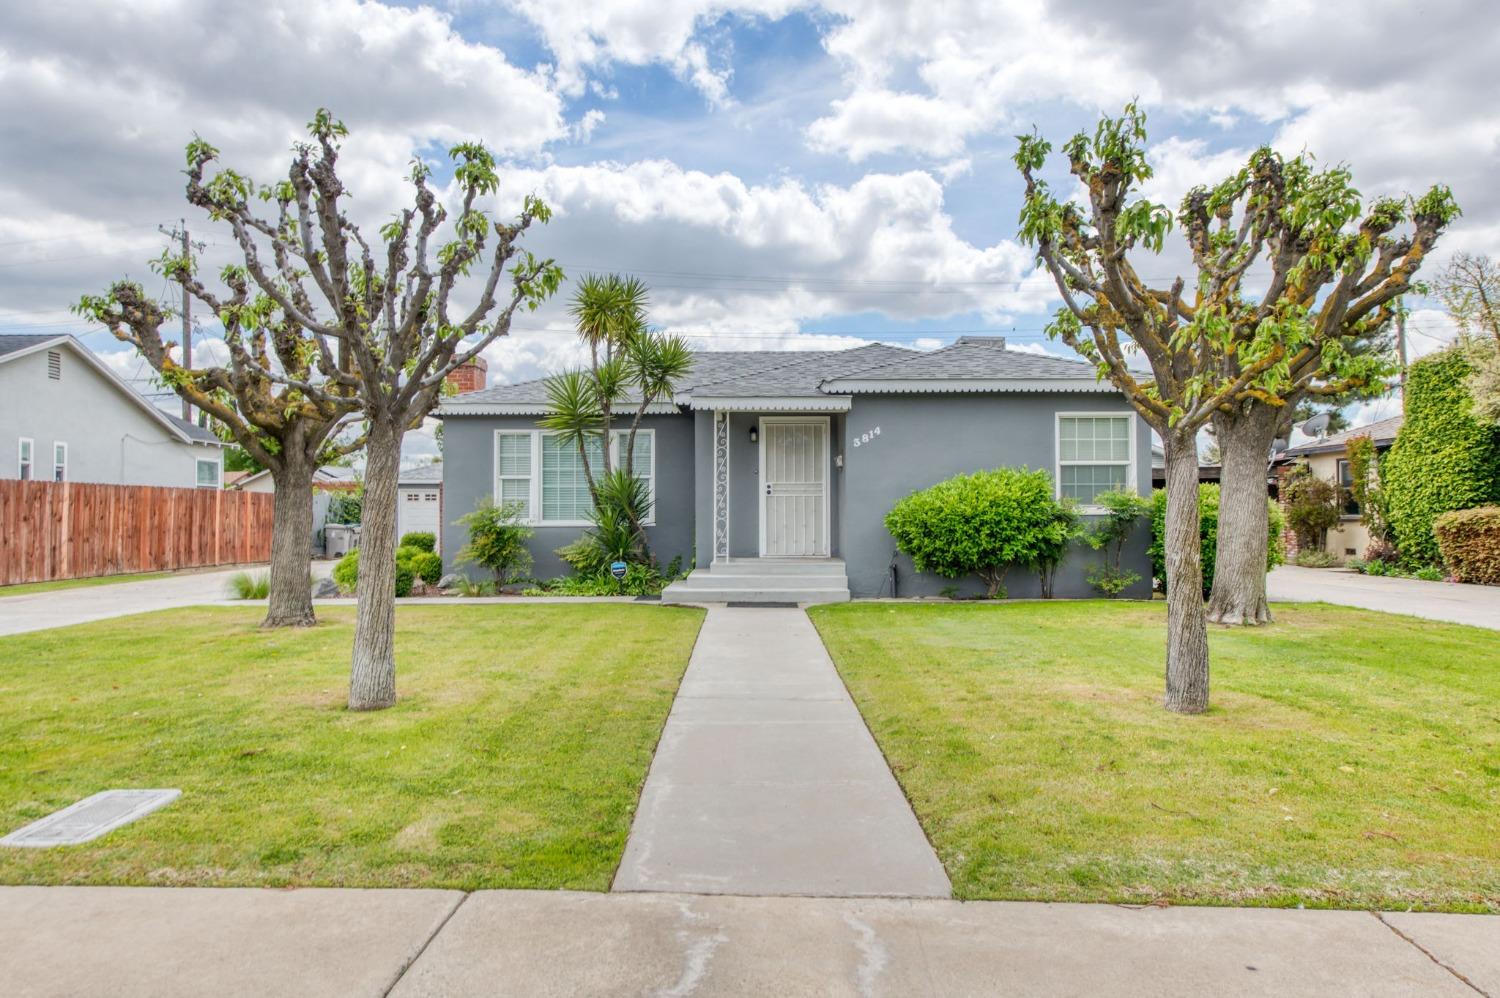 Photo of 3814 Arden Dr in Fresno, CA